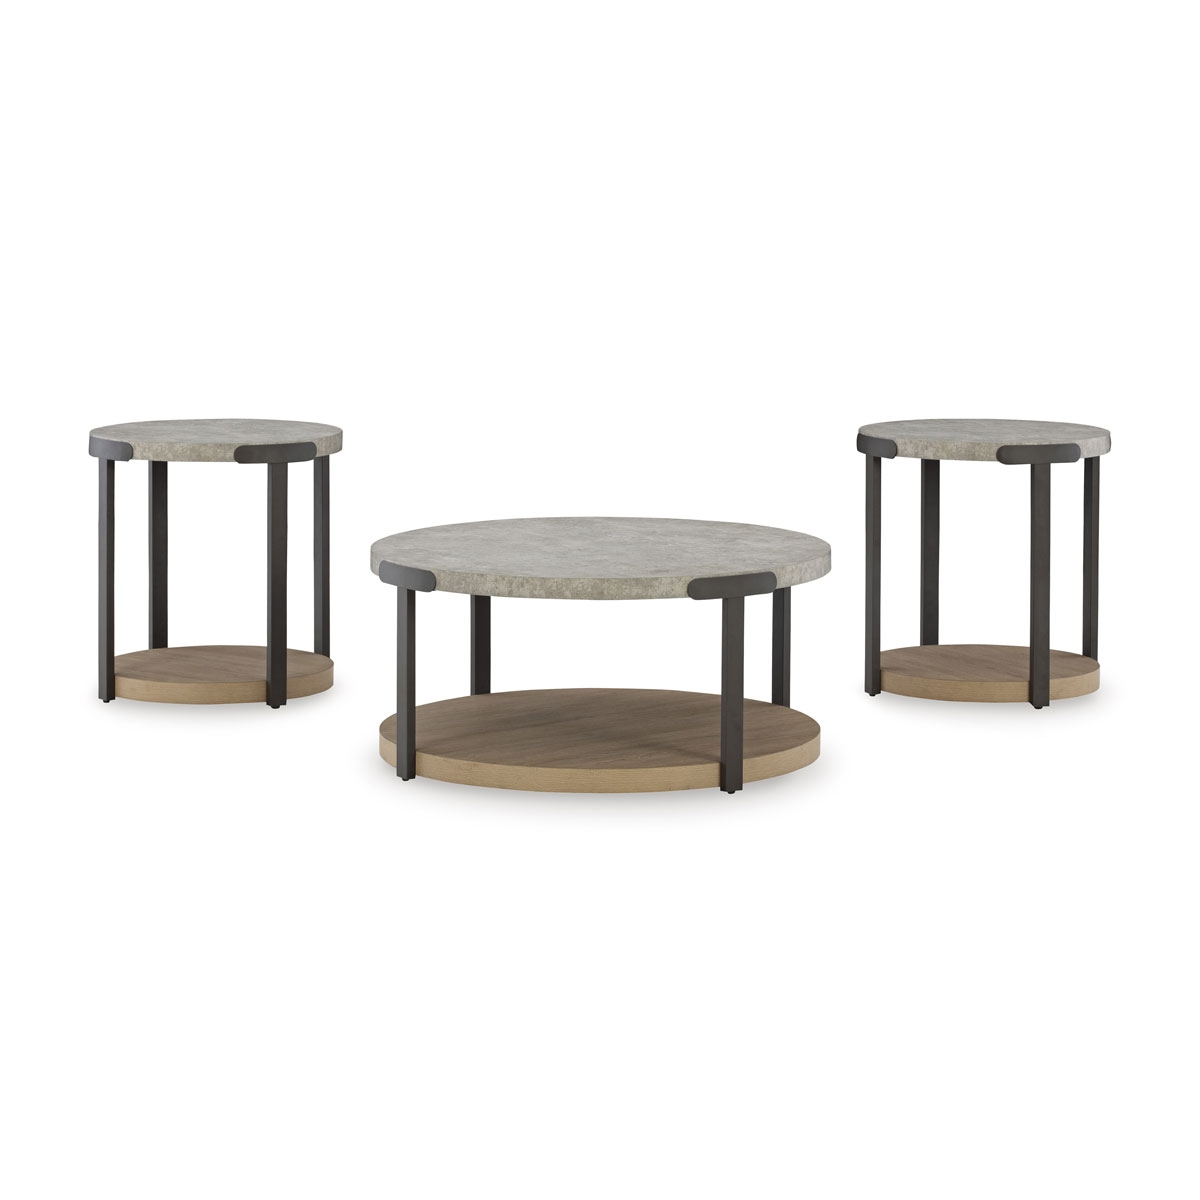 Picture of ZION SET OF 3 OCCASIONAL TABLES